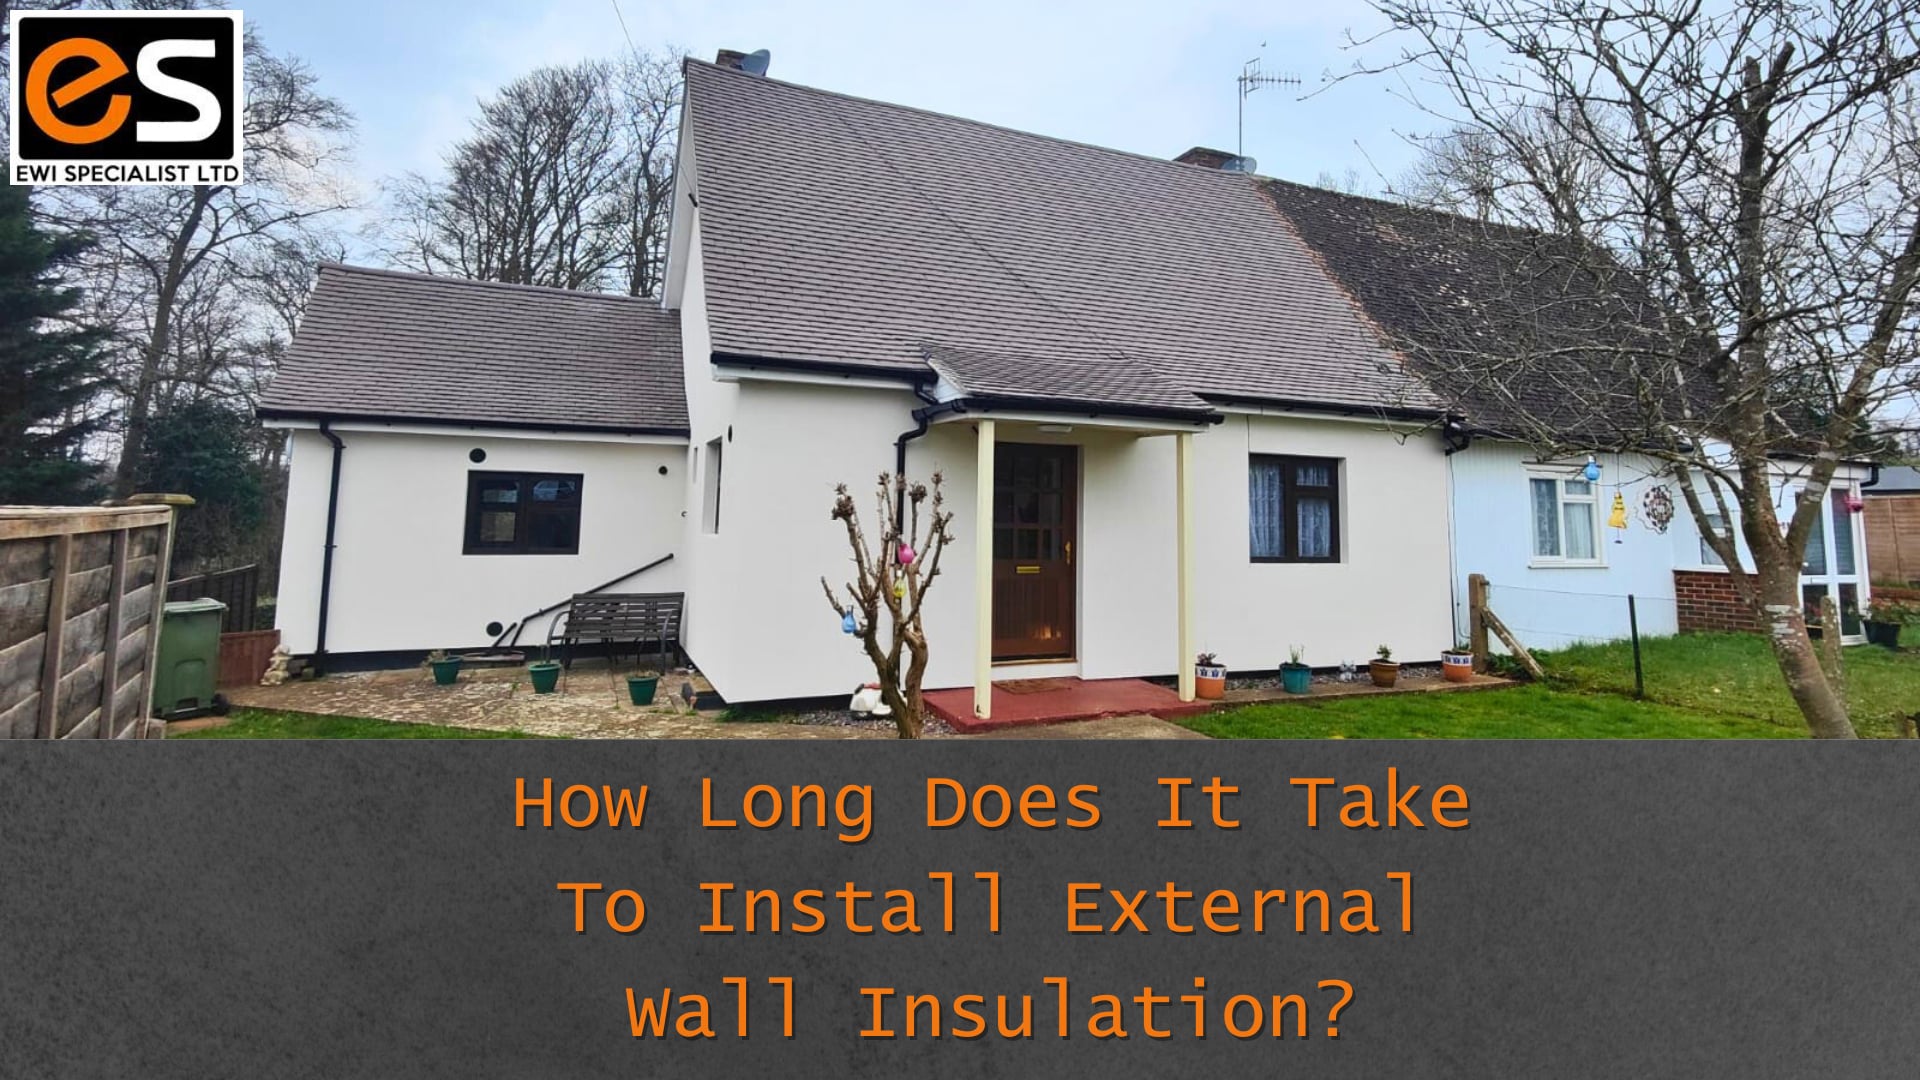 How long does it take to install external wall insulation?